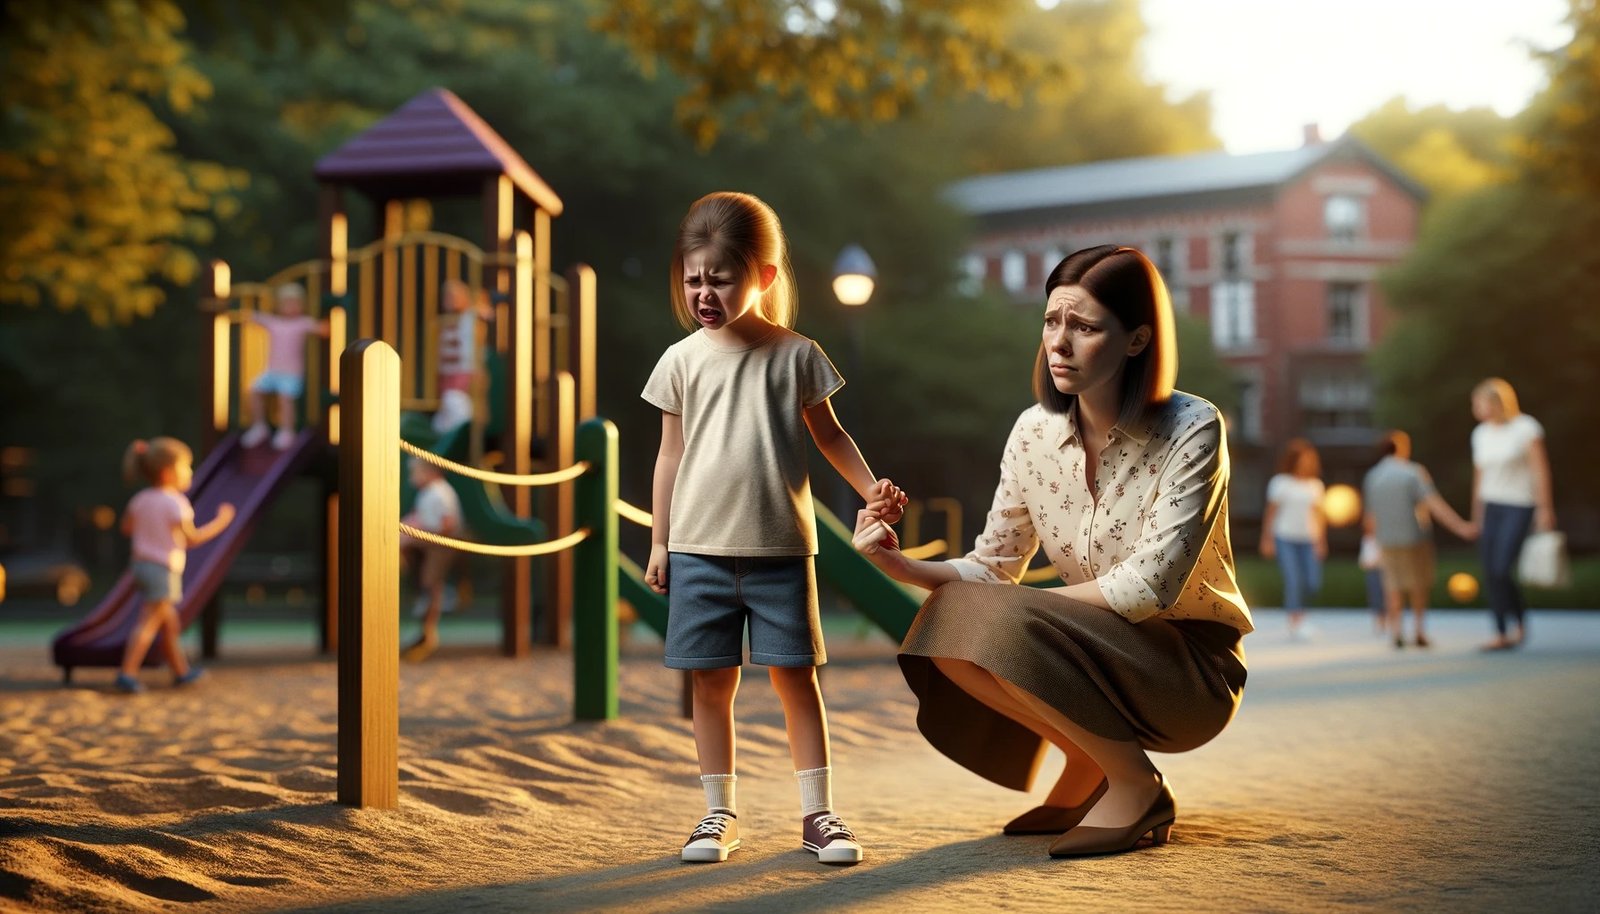 A young mother with her misbehaving young daughter at a playground.